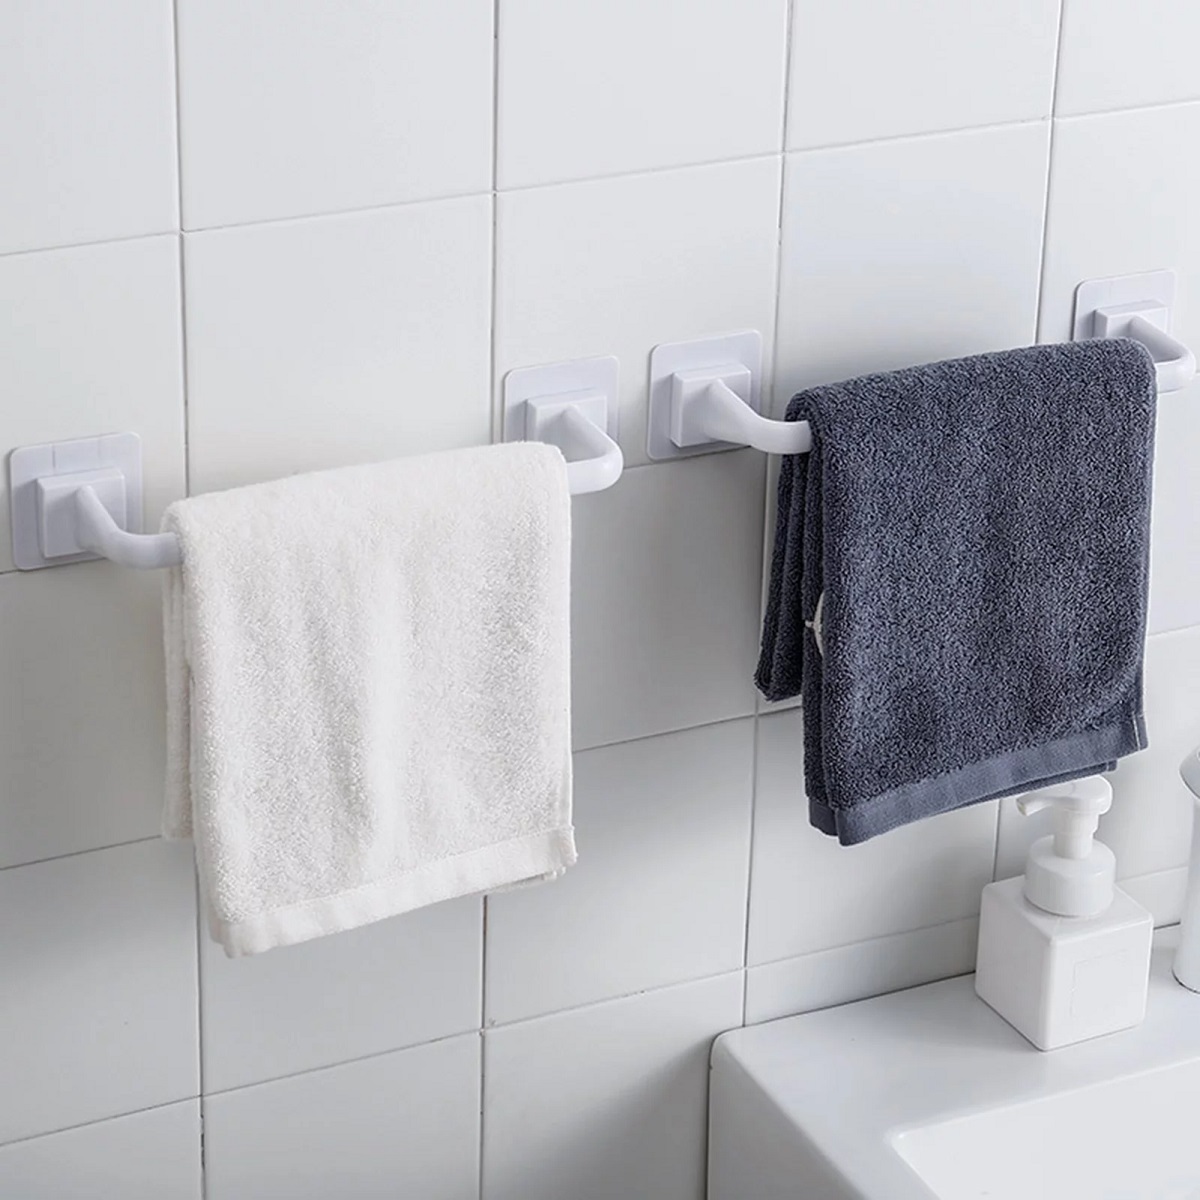 How To Keep Towels From Sliding Off Towel Bar